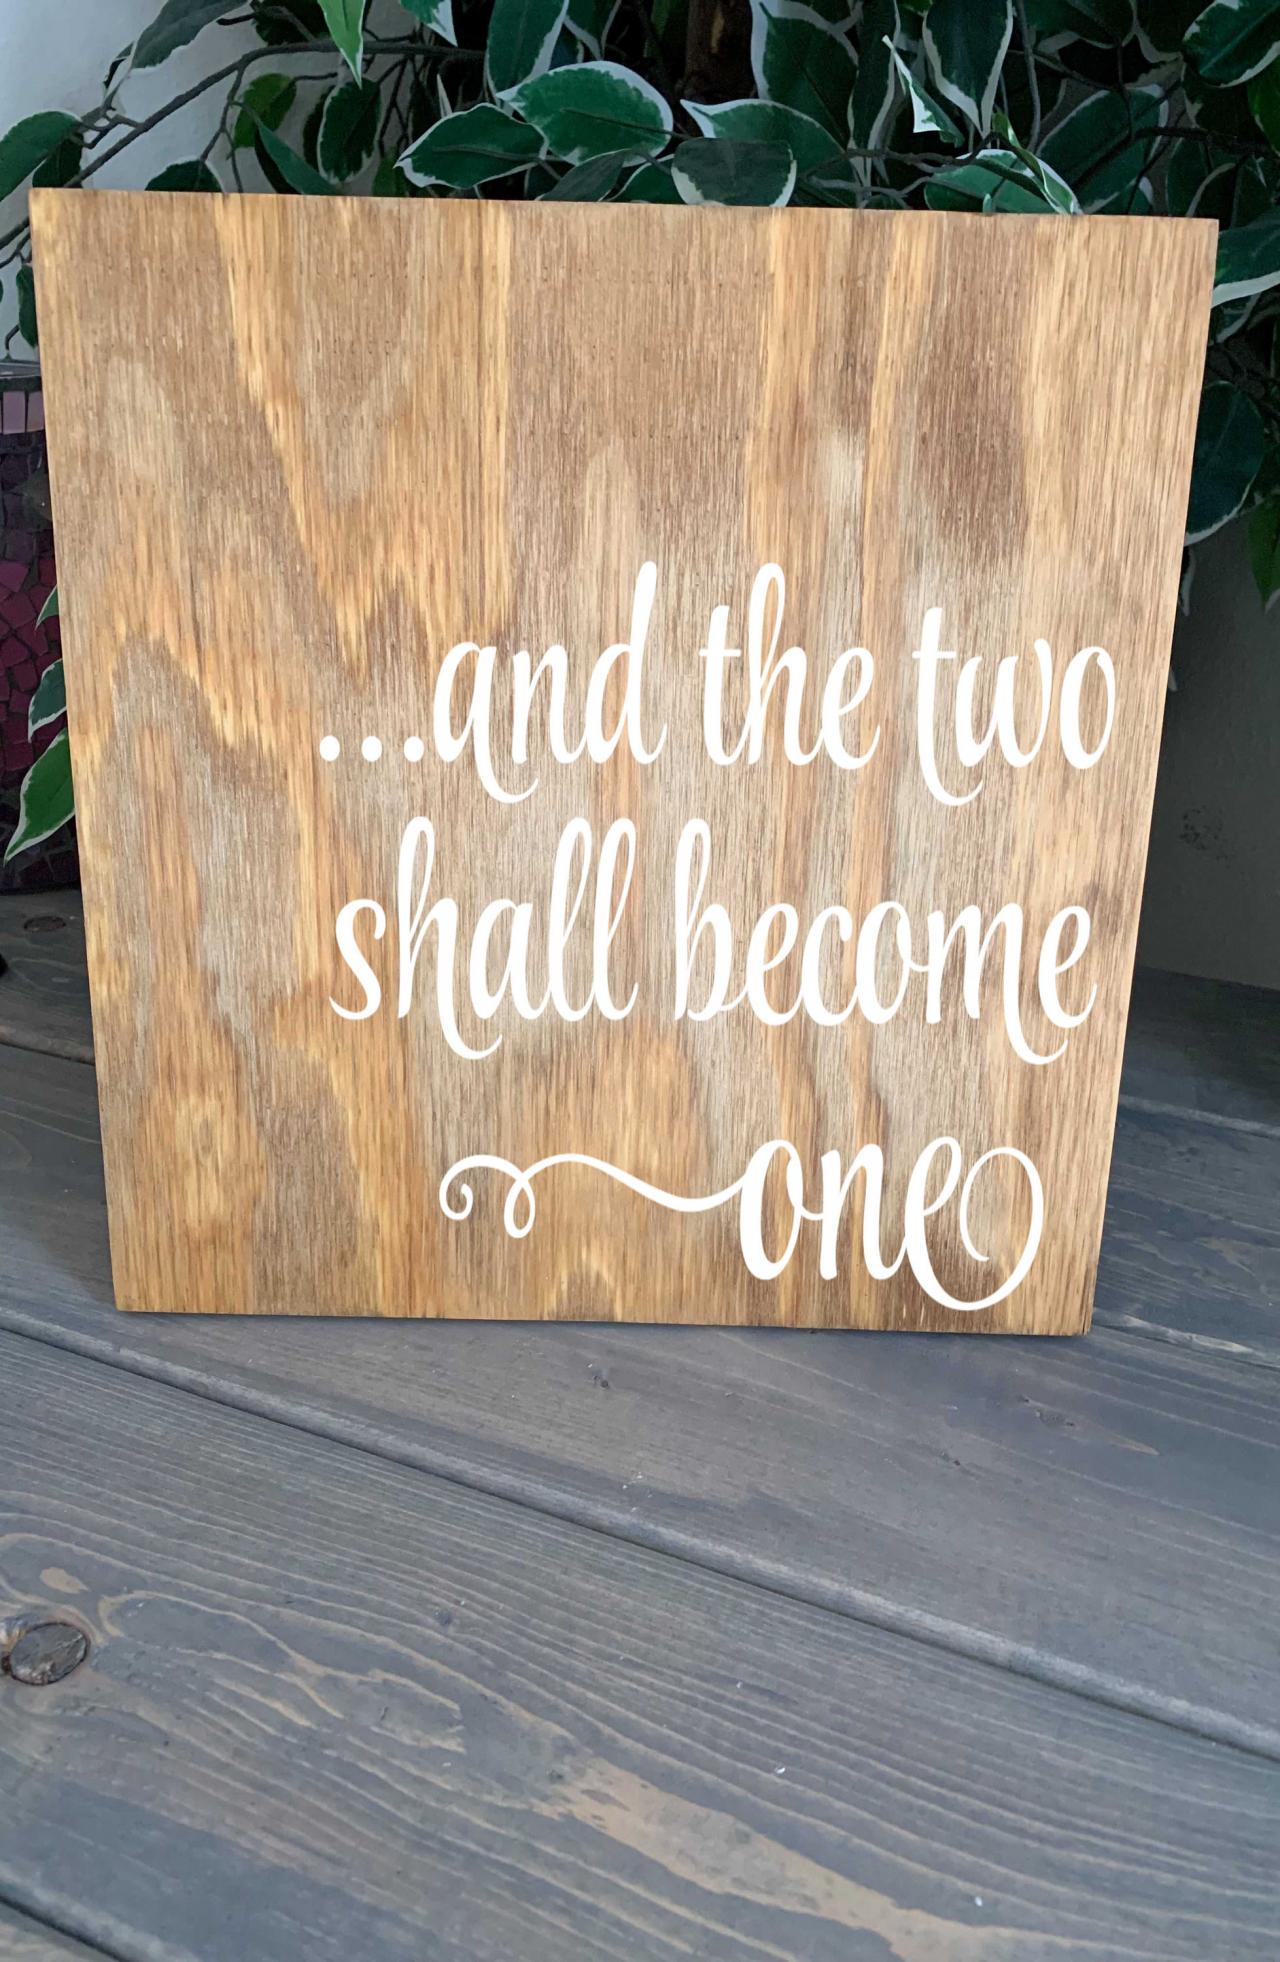 And The Two Shall Become One. 12x12 Hand Painted Wood Sign. Home Decor.wedding Day Decor. Reception Decor. Wedding. Wedding Season.